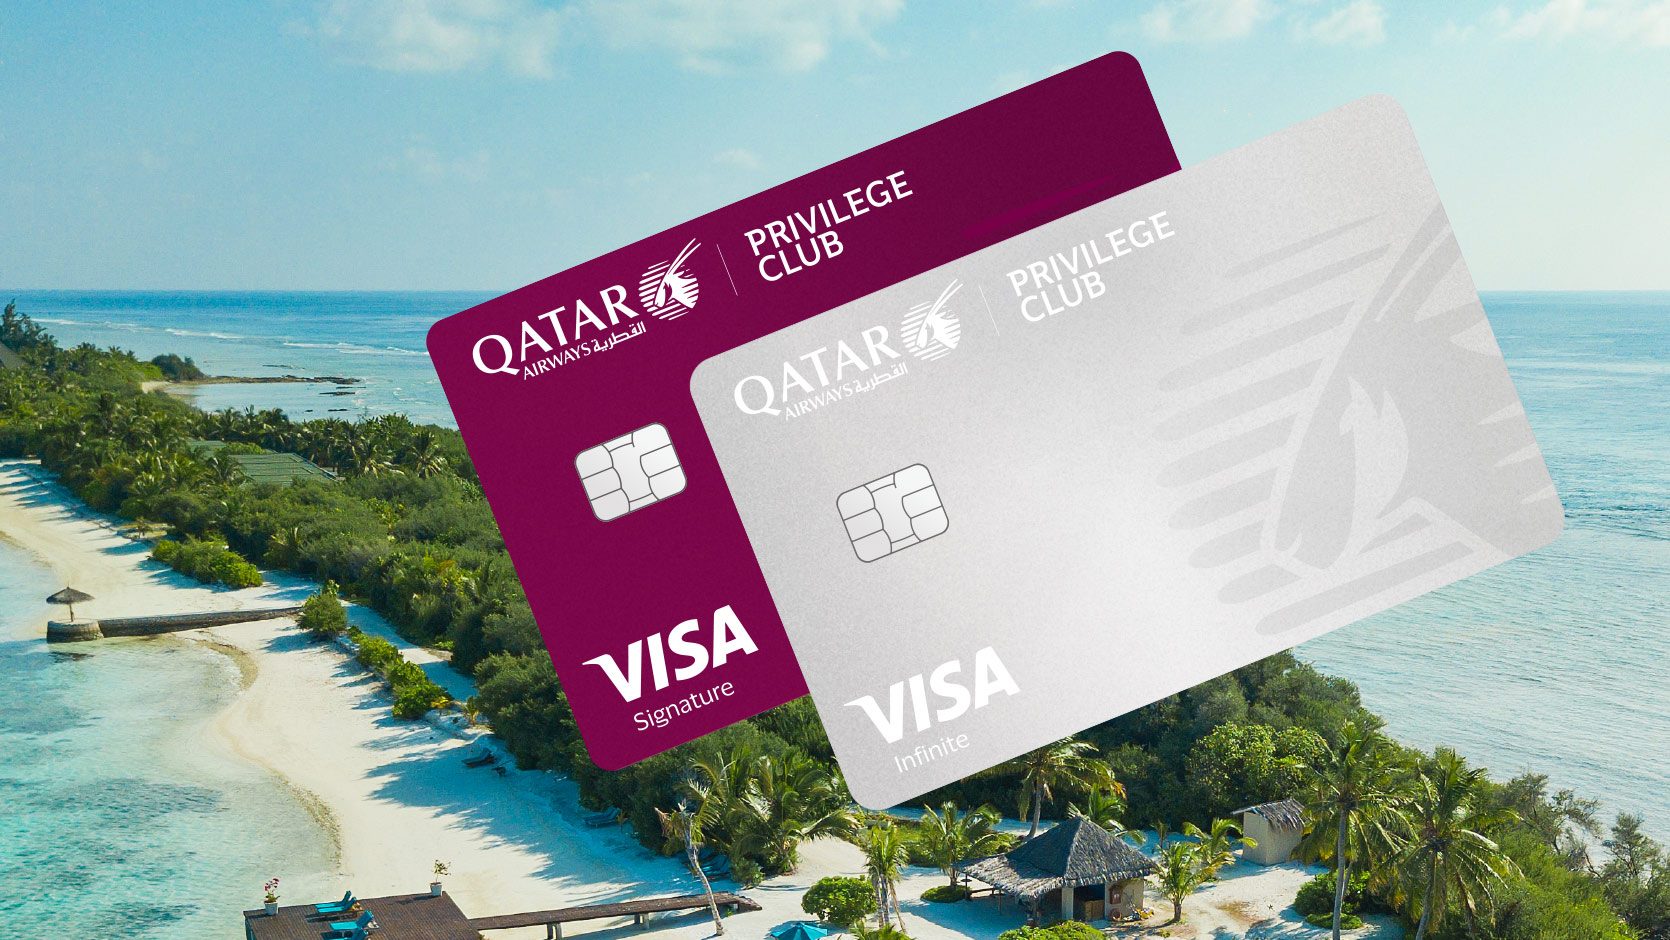 Cardless Qatar Credit Cards Now Live, Earn Up to 60K Bonus with $499 Annual Fee